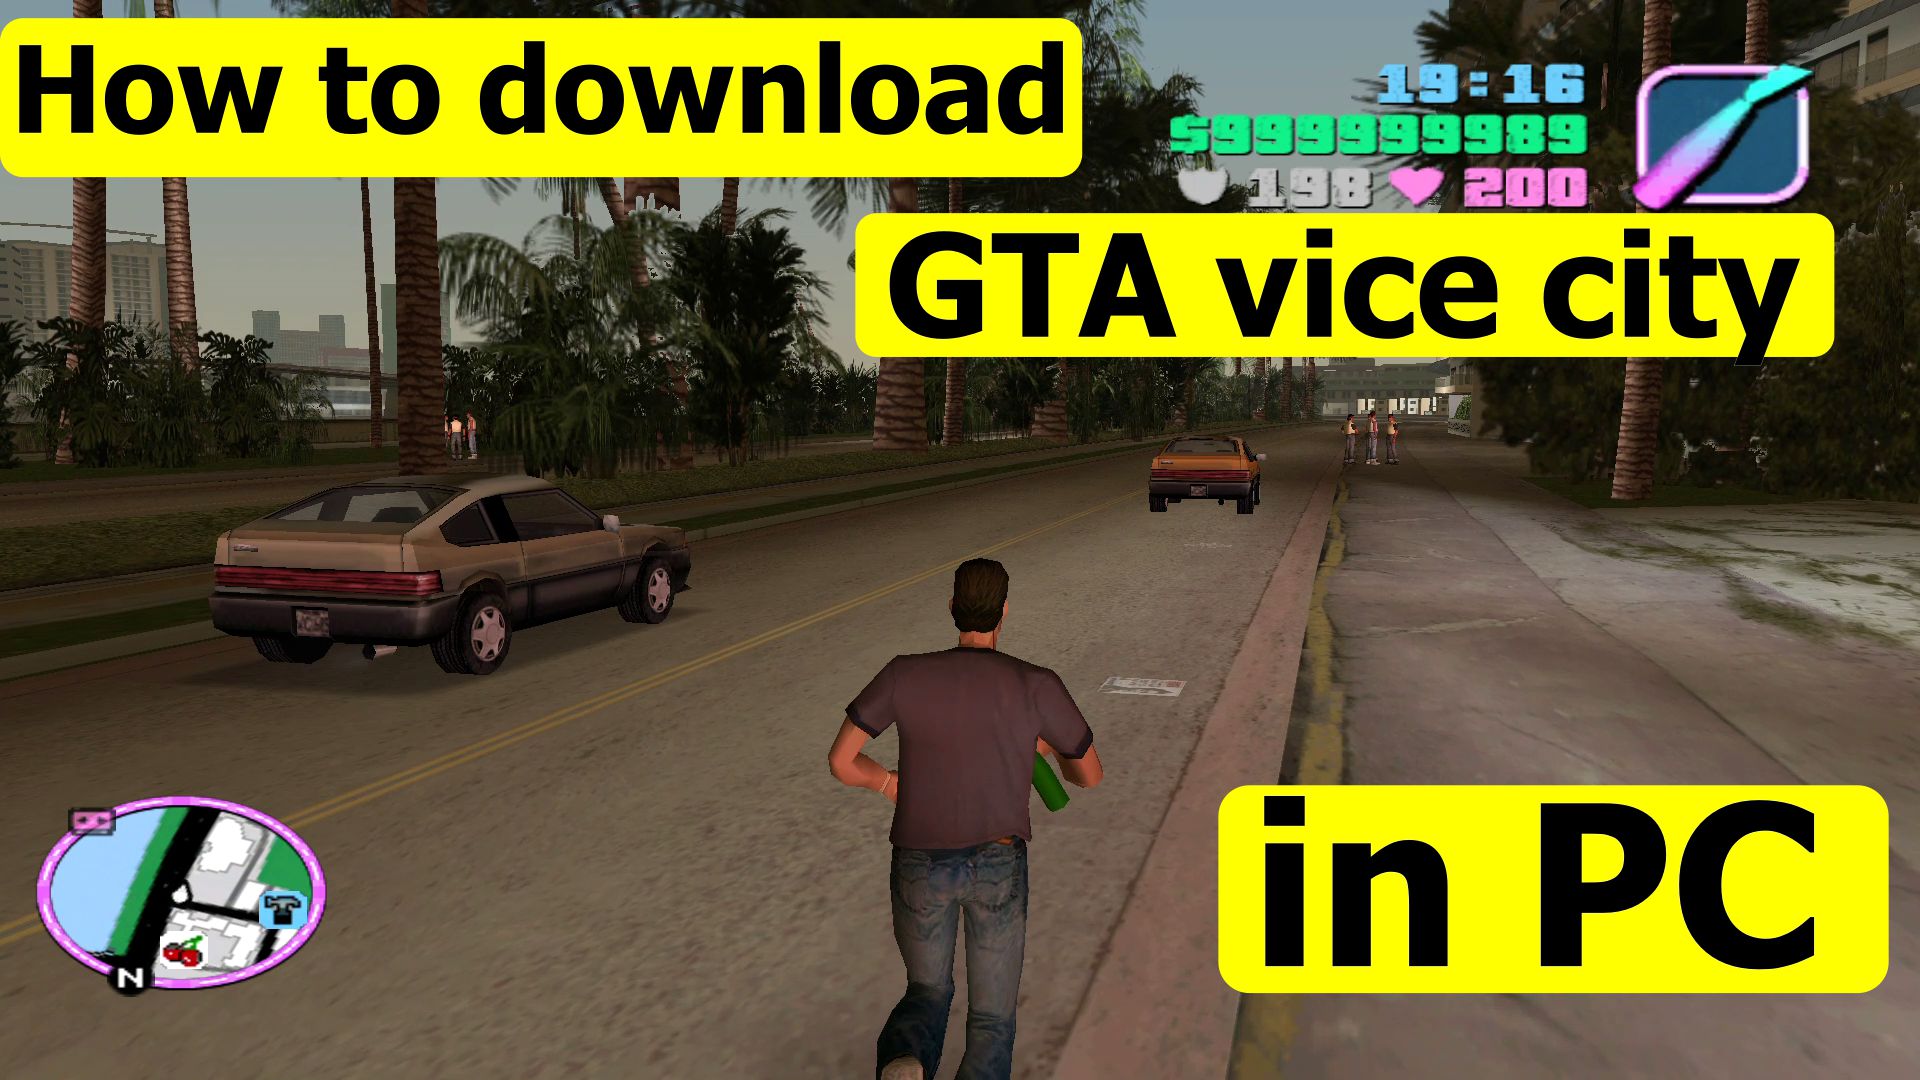 How to download GTA Vice City on PC laptop